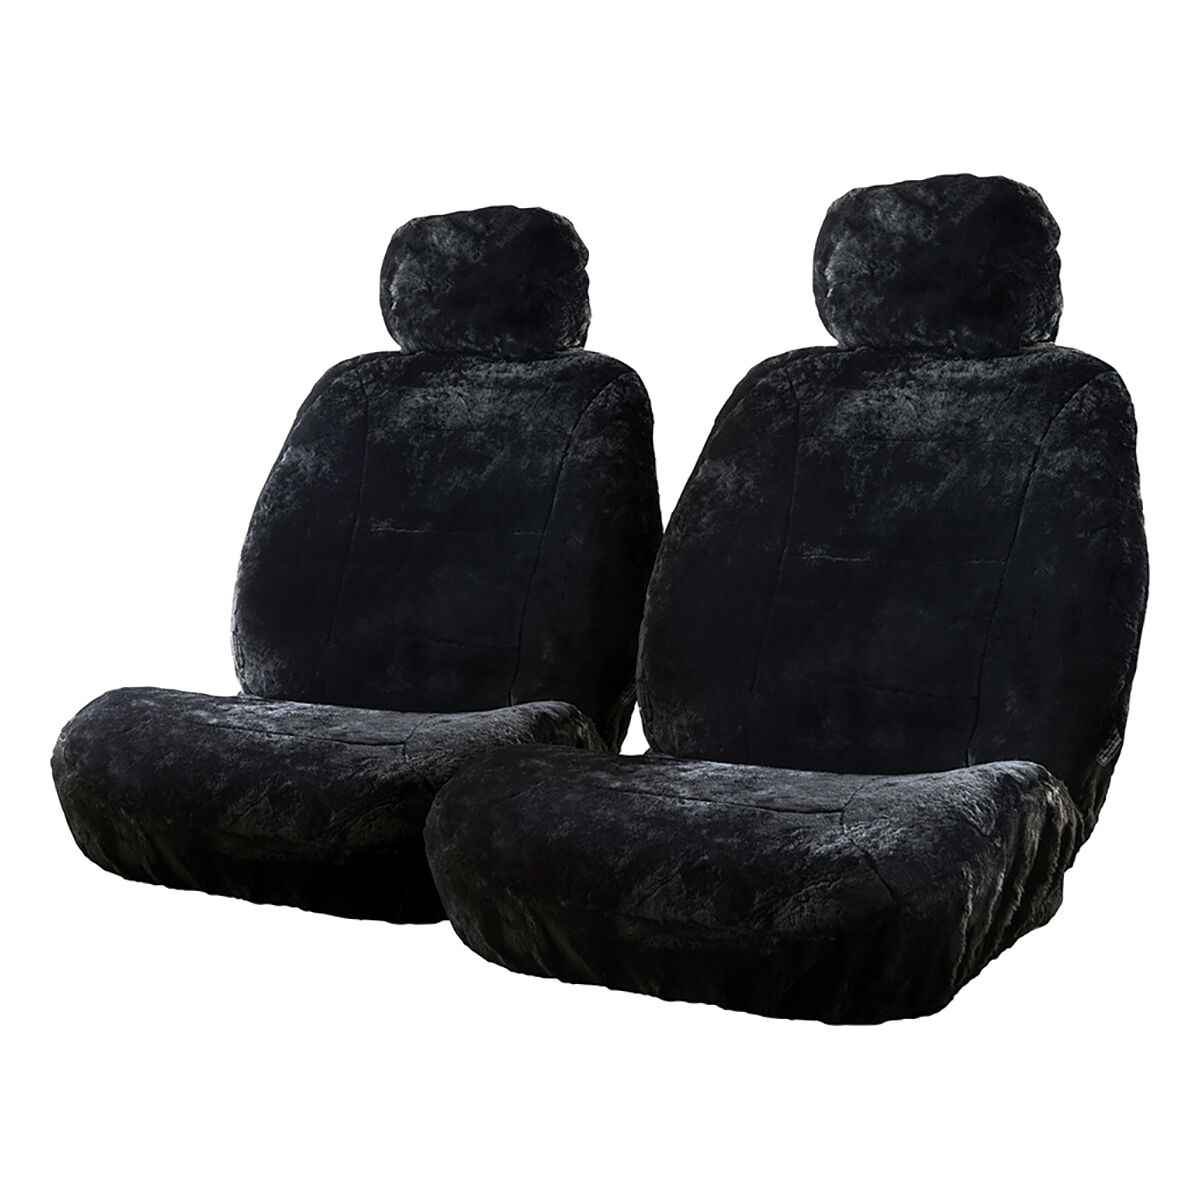 Silver CLOUDLUX Sheepskin Seat Covers - Black Adjustable Headrests